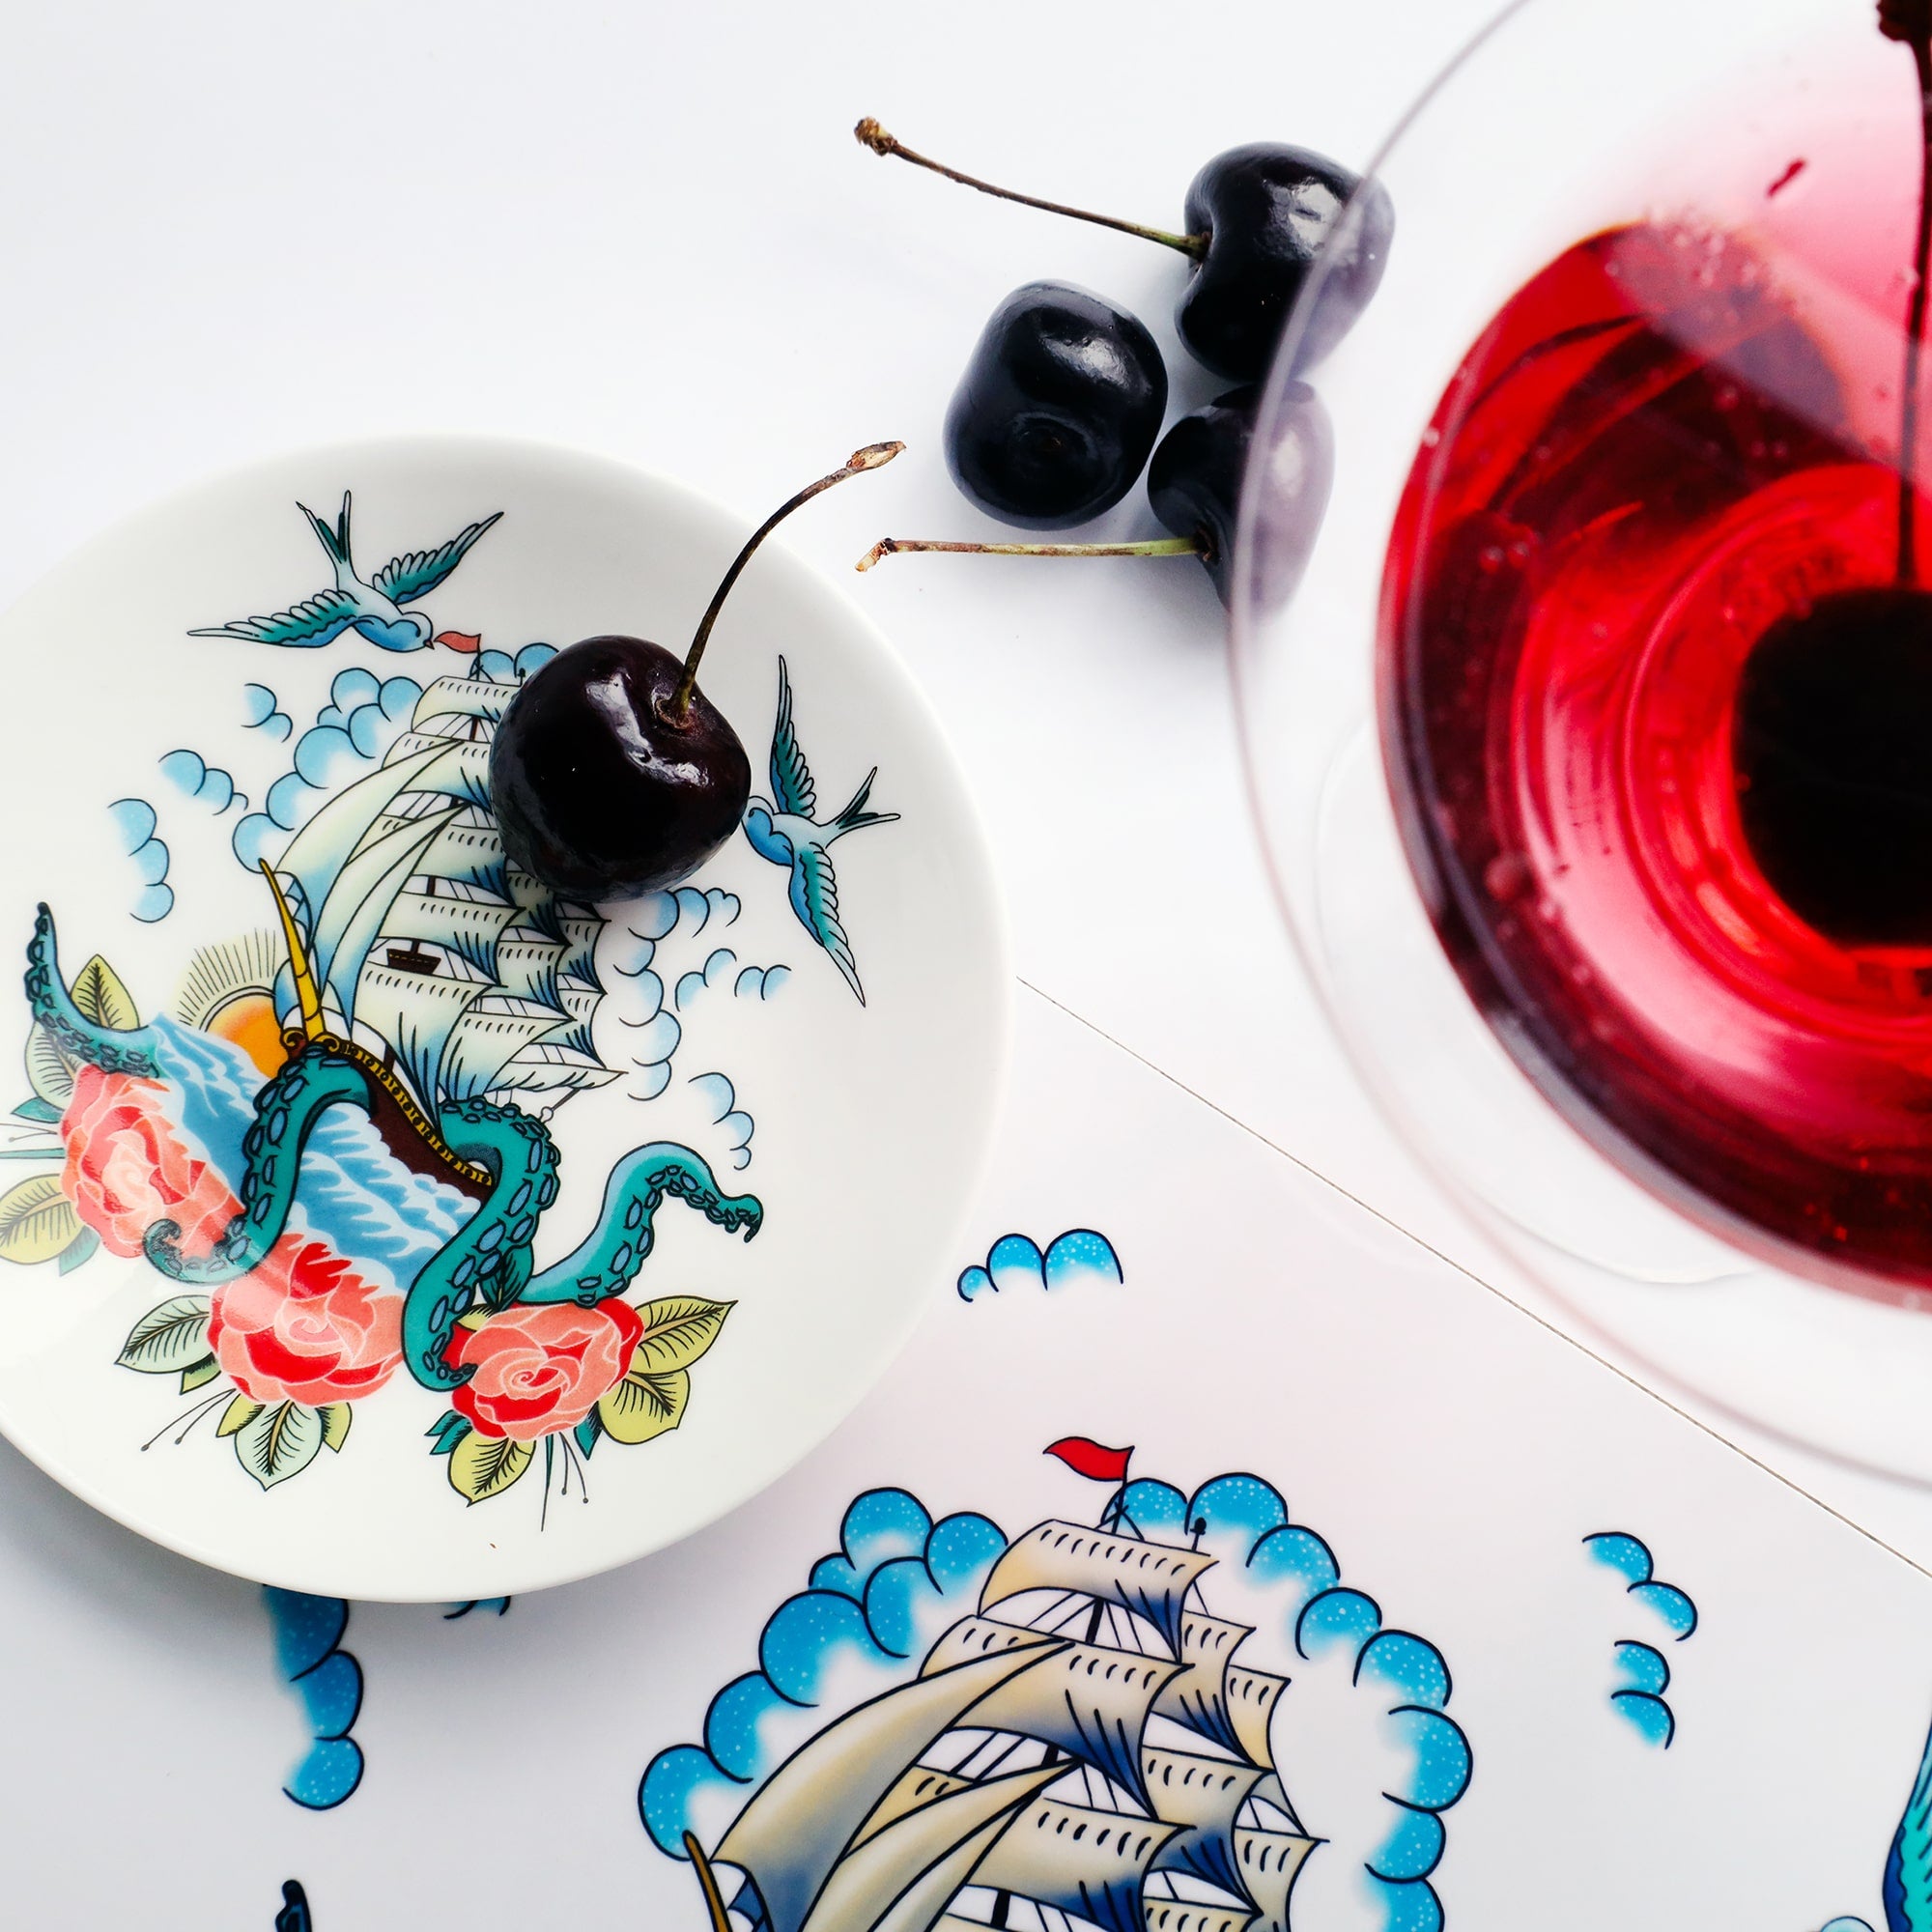 Nibbles dish with a ship and kraken design in the style of a tattoo, with a cherry in to show the scale.